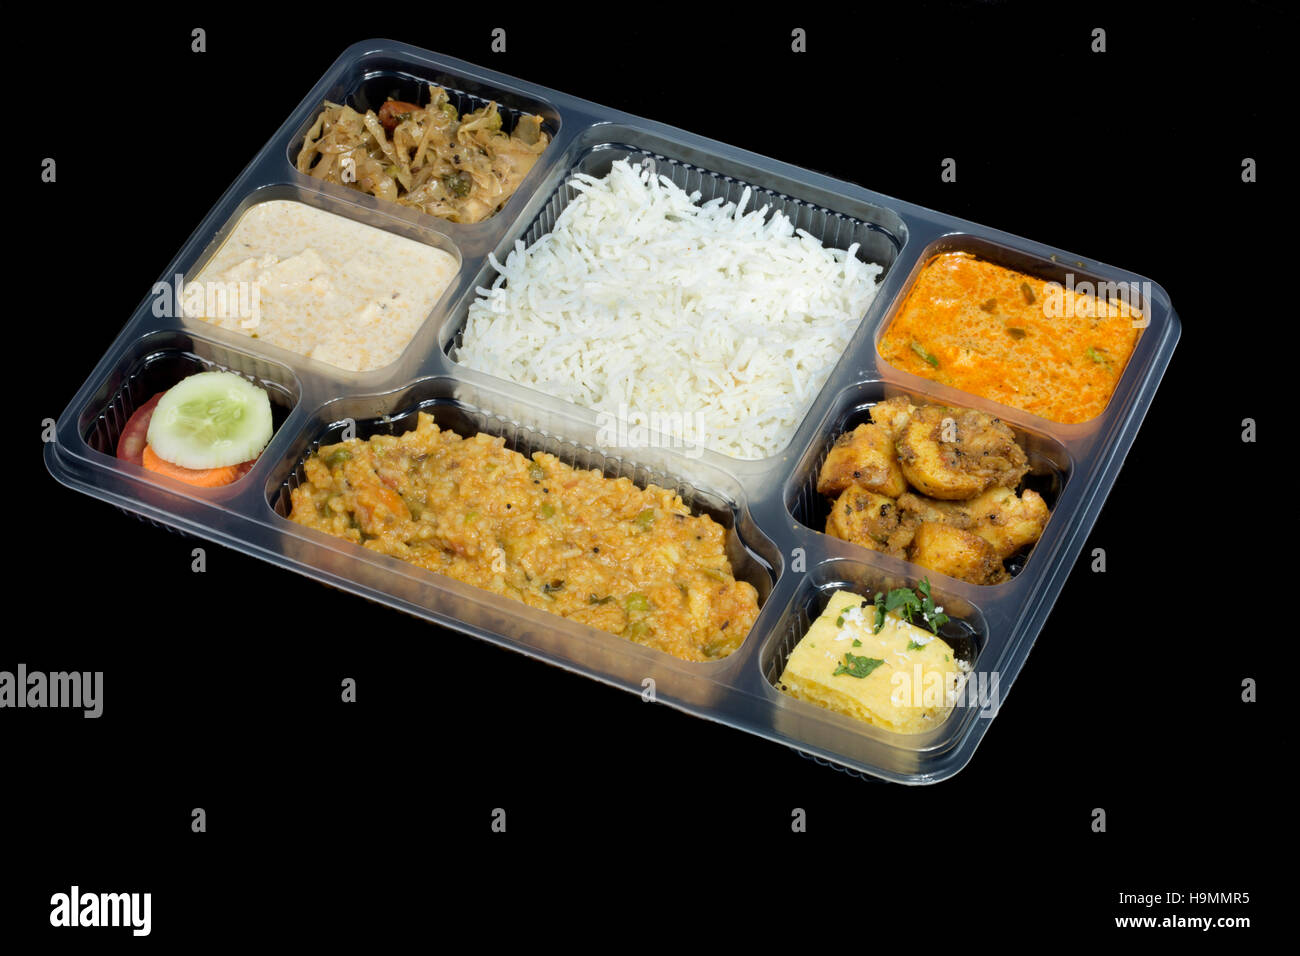 Rajasthani Thali packed in In lunch Box, Pune, India Stock Photo - Alamy